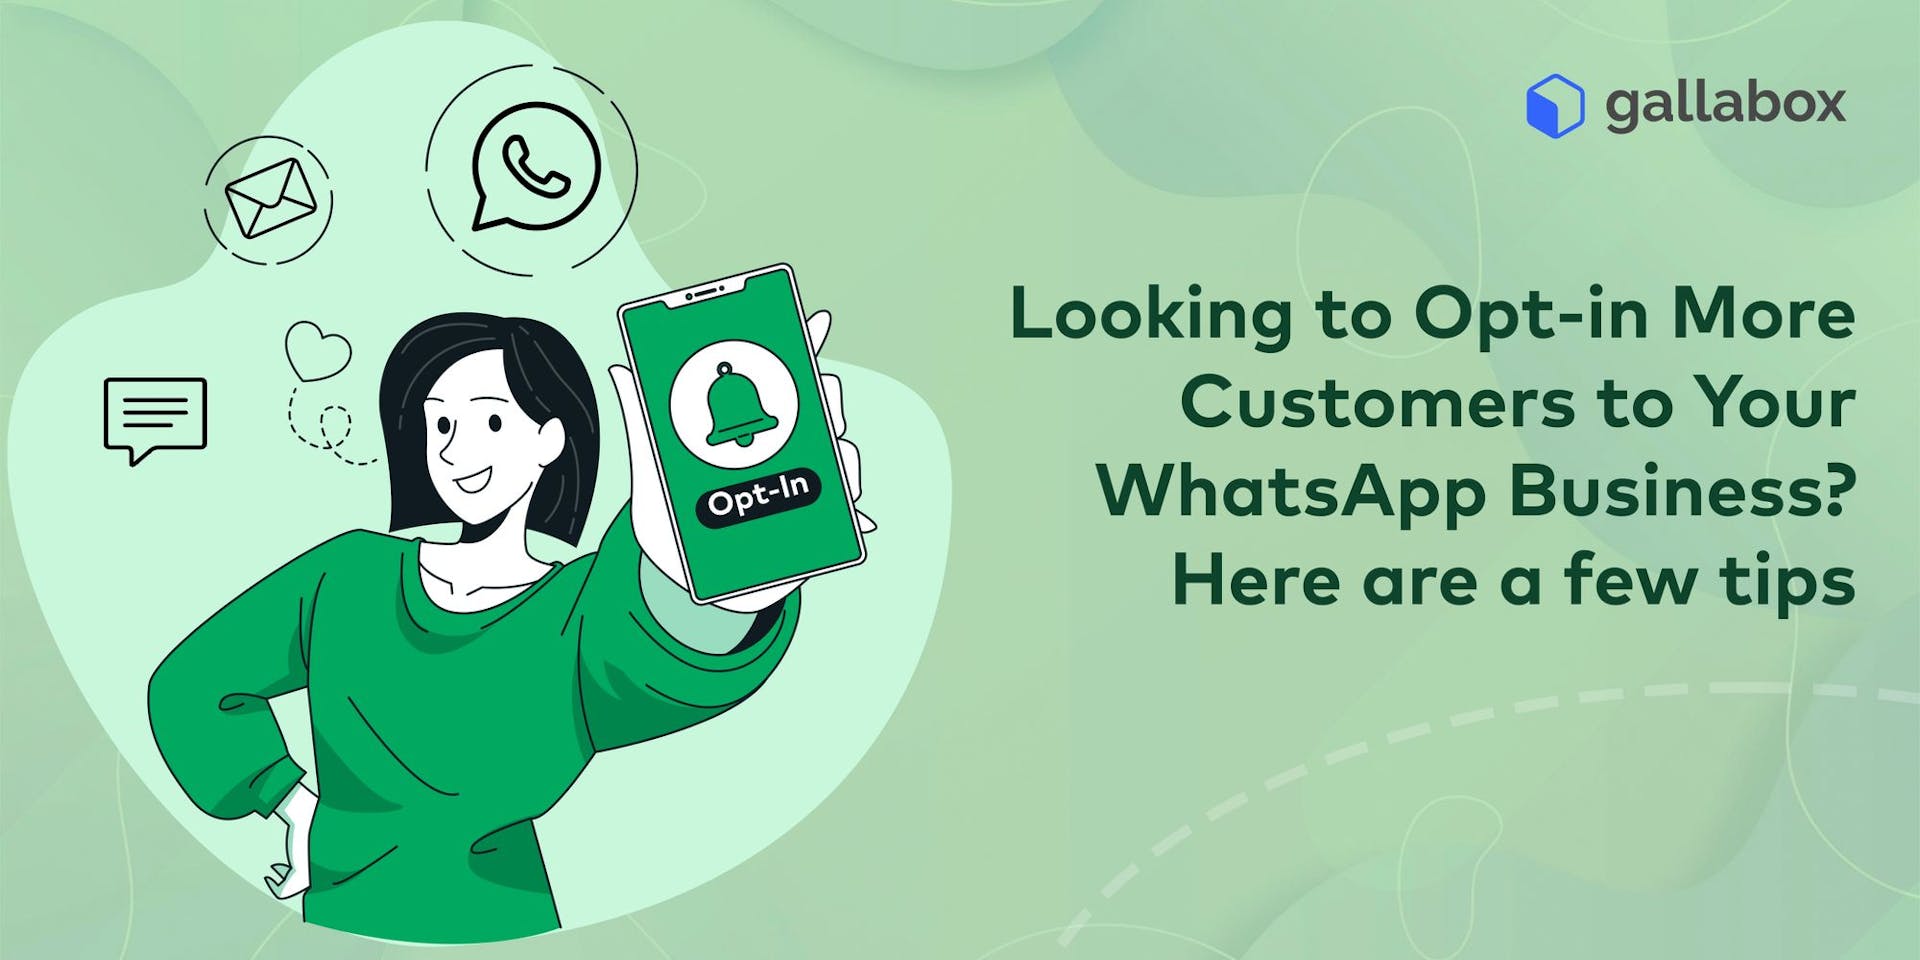 Looking to Opt-in More Customers to Your WhatsApp Business? Here are a few tips